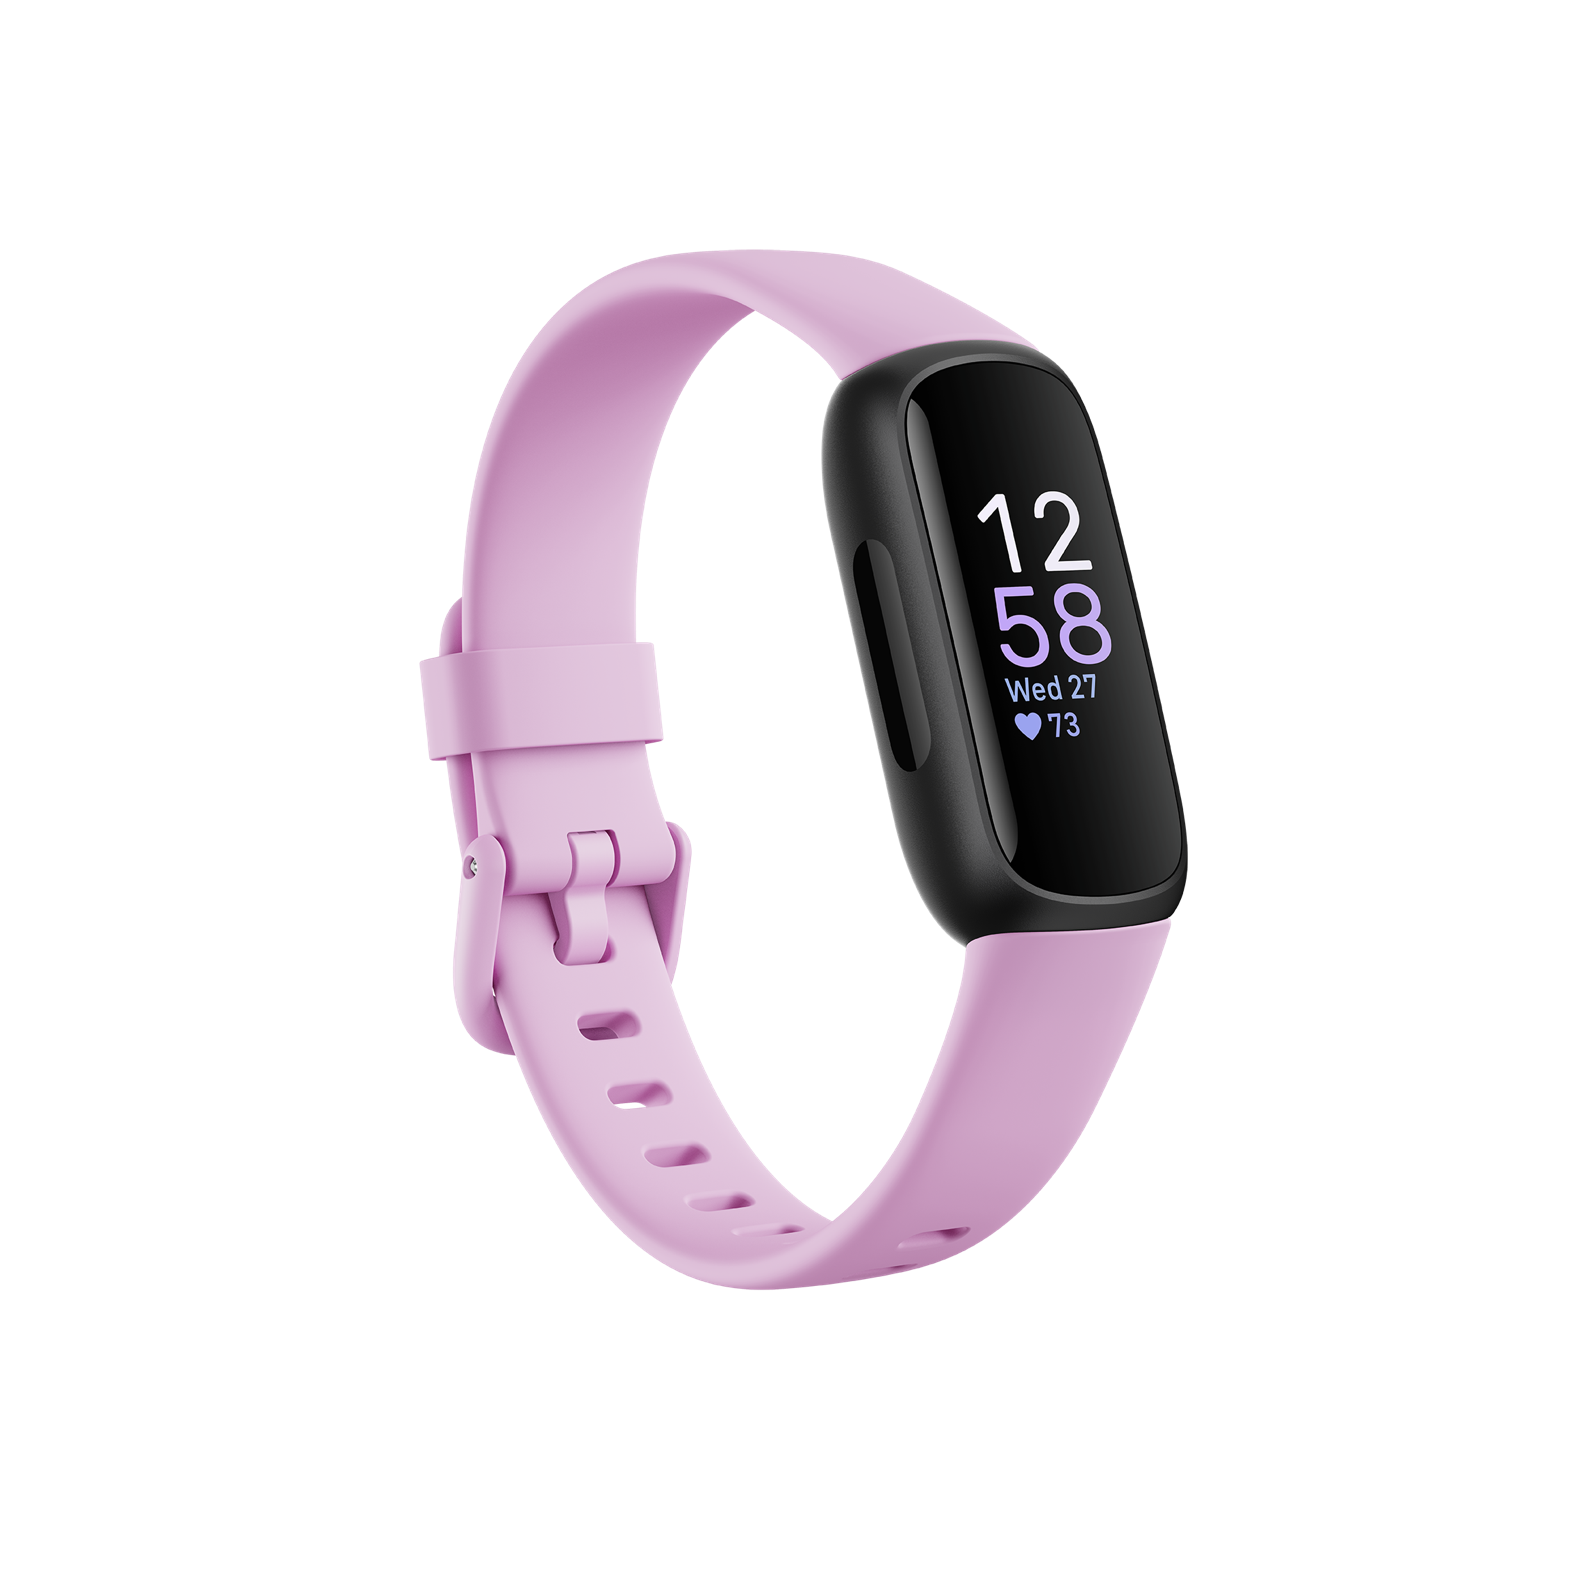 https://www.fitbit.com/global/content/dam/fitbit/global/pdp/devices/inspire3/herostatic/violet/inspire3-lilacbliss-device-3qt.png